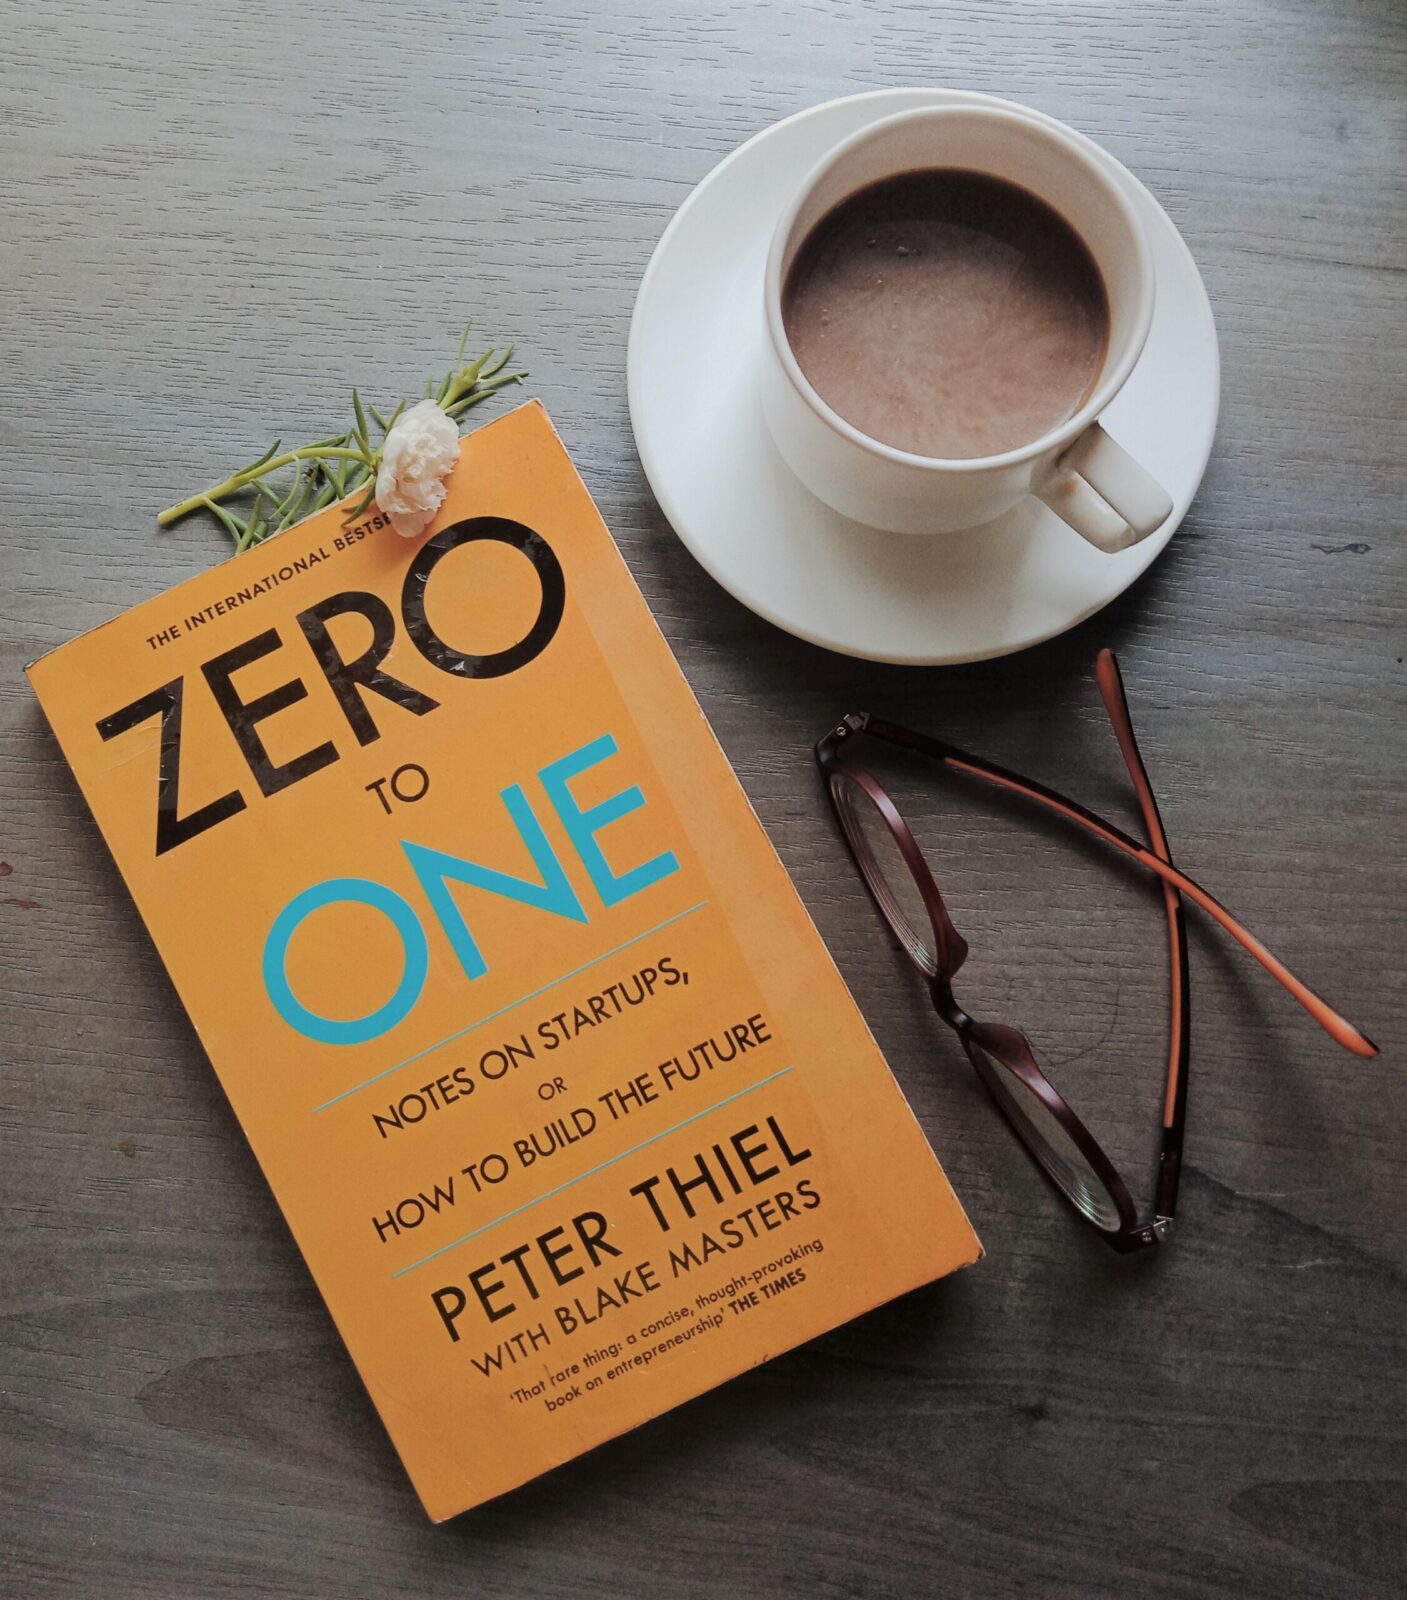 zero to one book free download